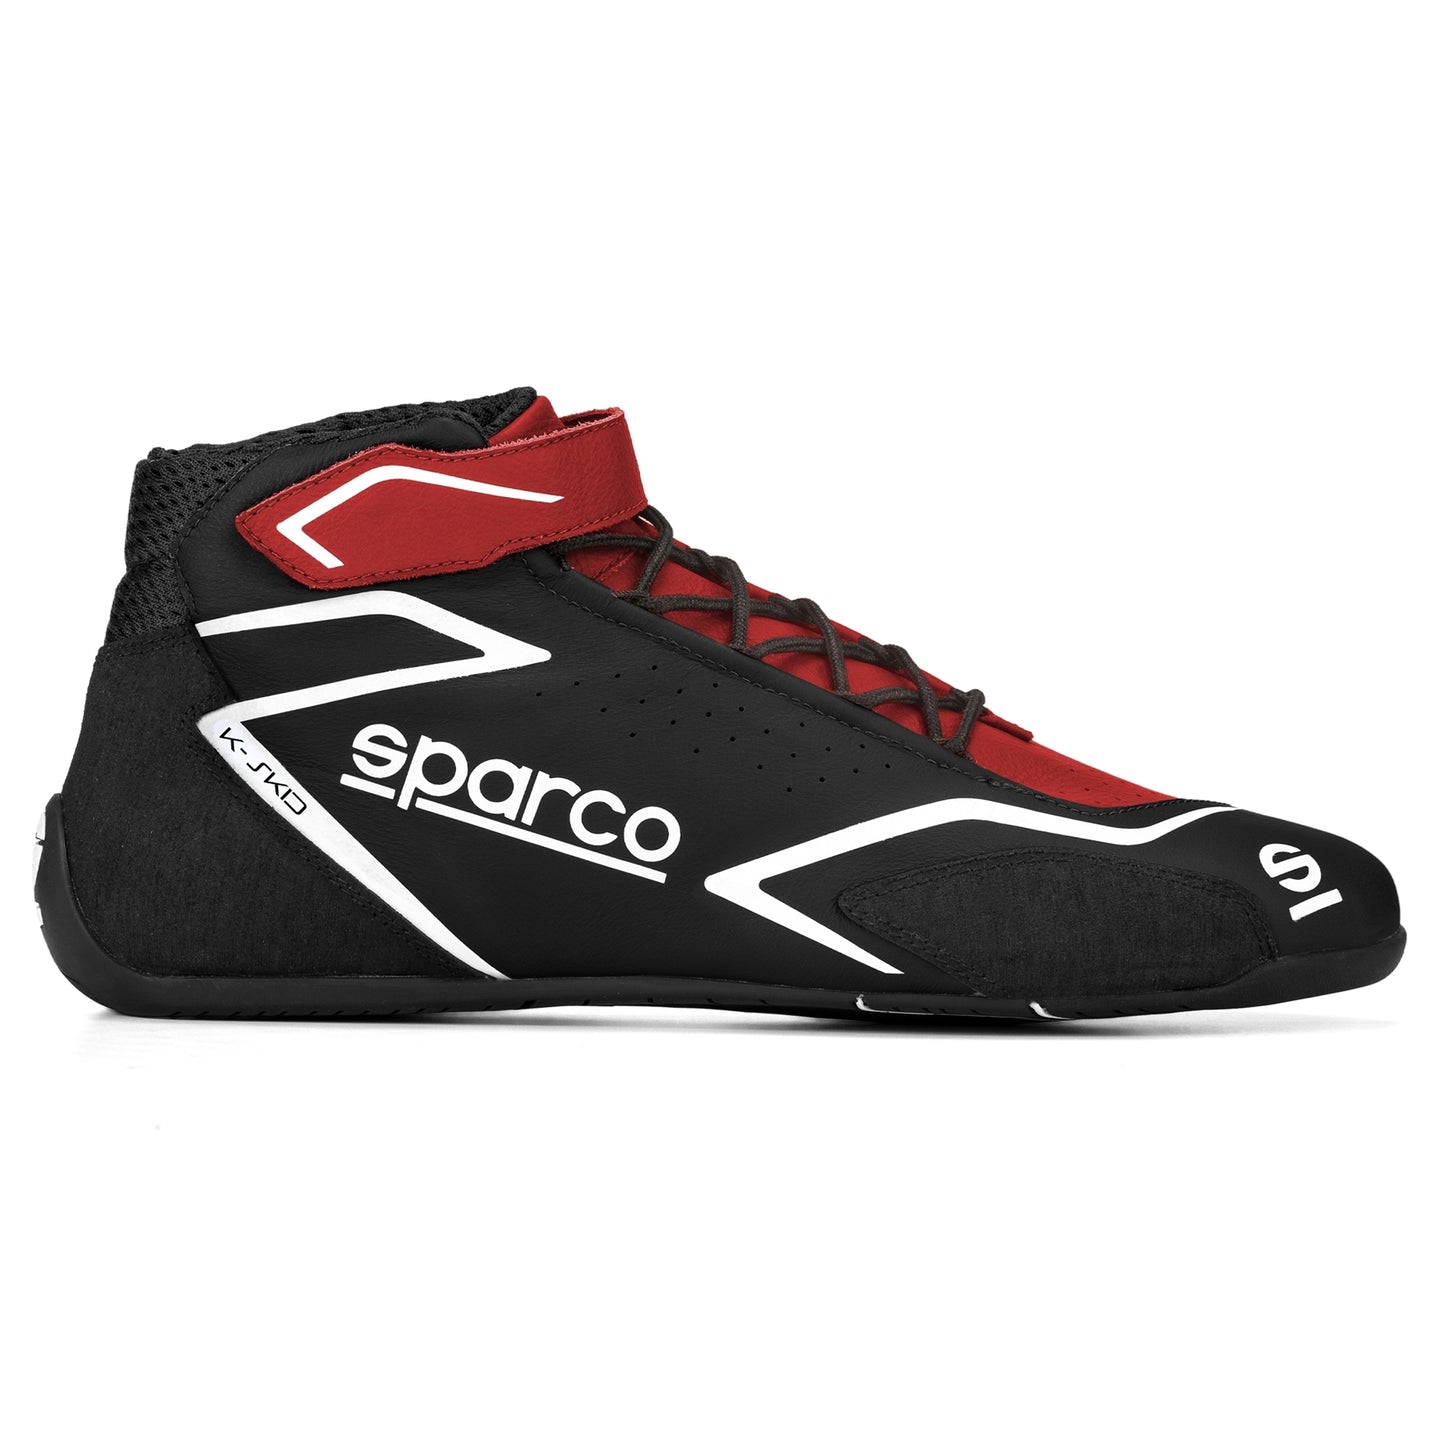 Sparco K-Skid Racing Shoes